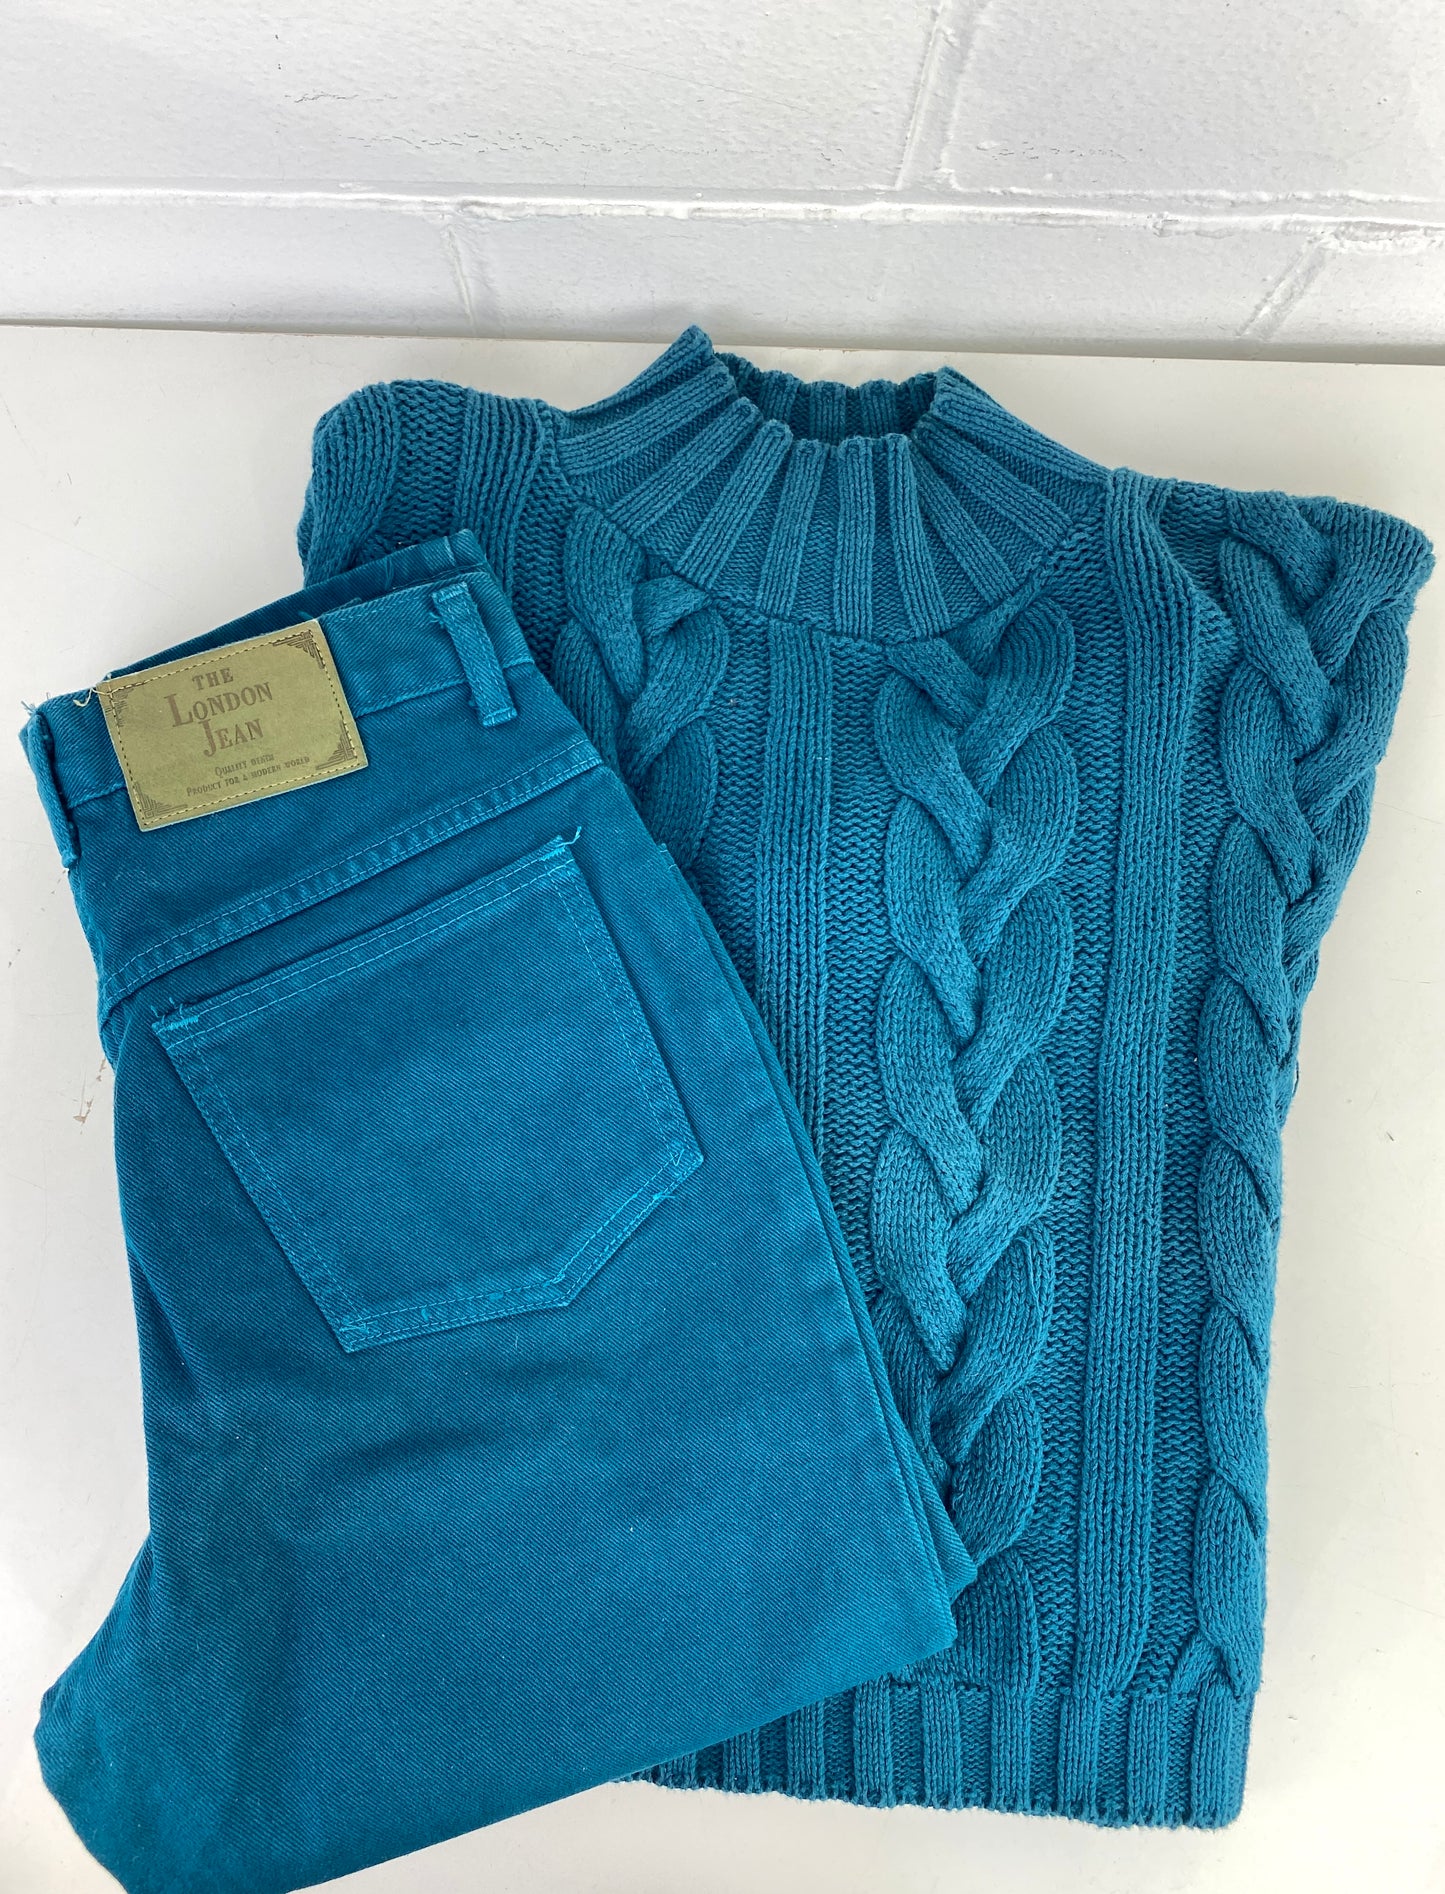 Vintage 1990s Deadstock Coloured Denim Mom Jeans and Cotton Cable Knit Sweater Set, x4 Colours Available